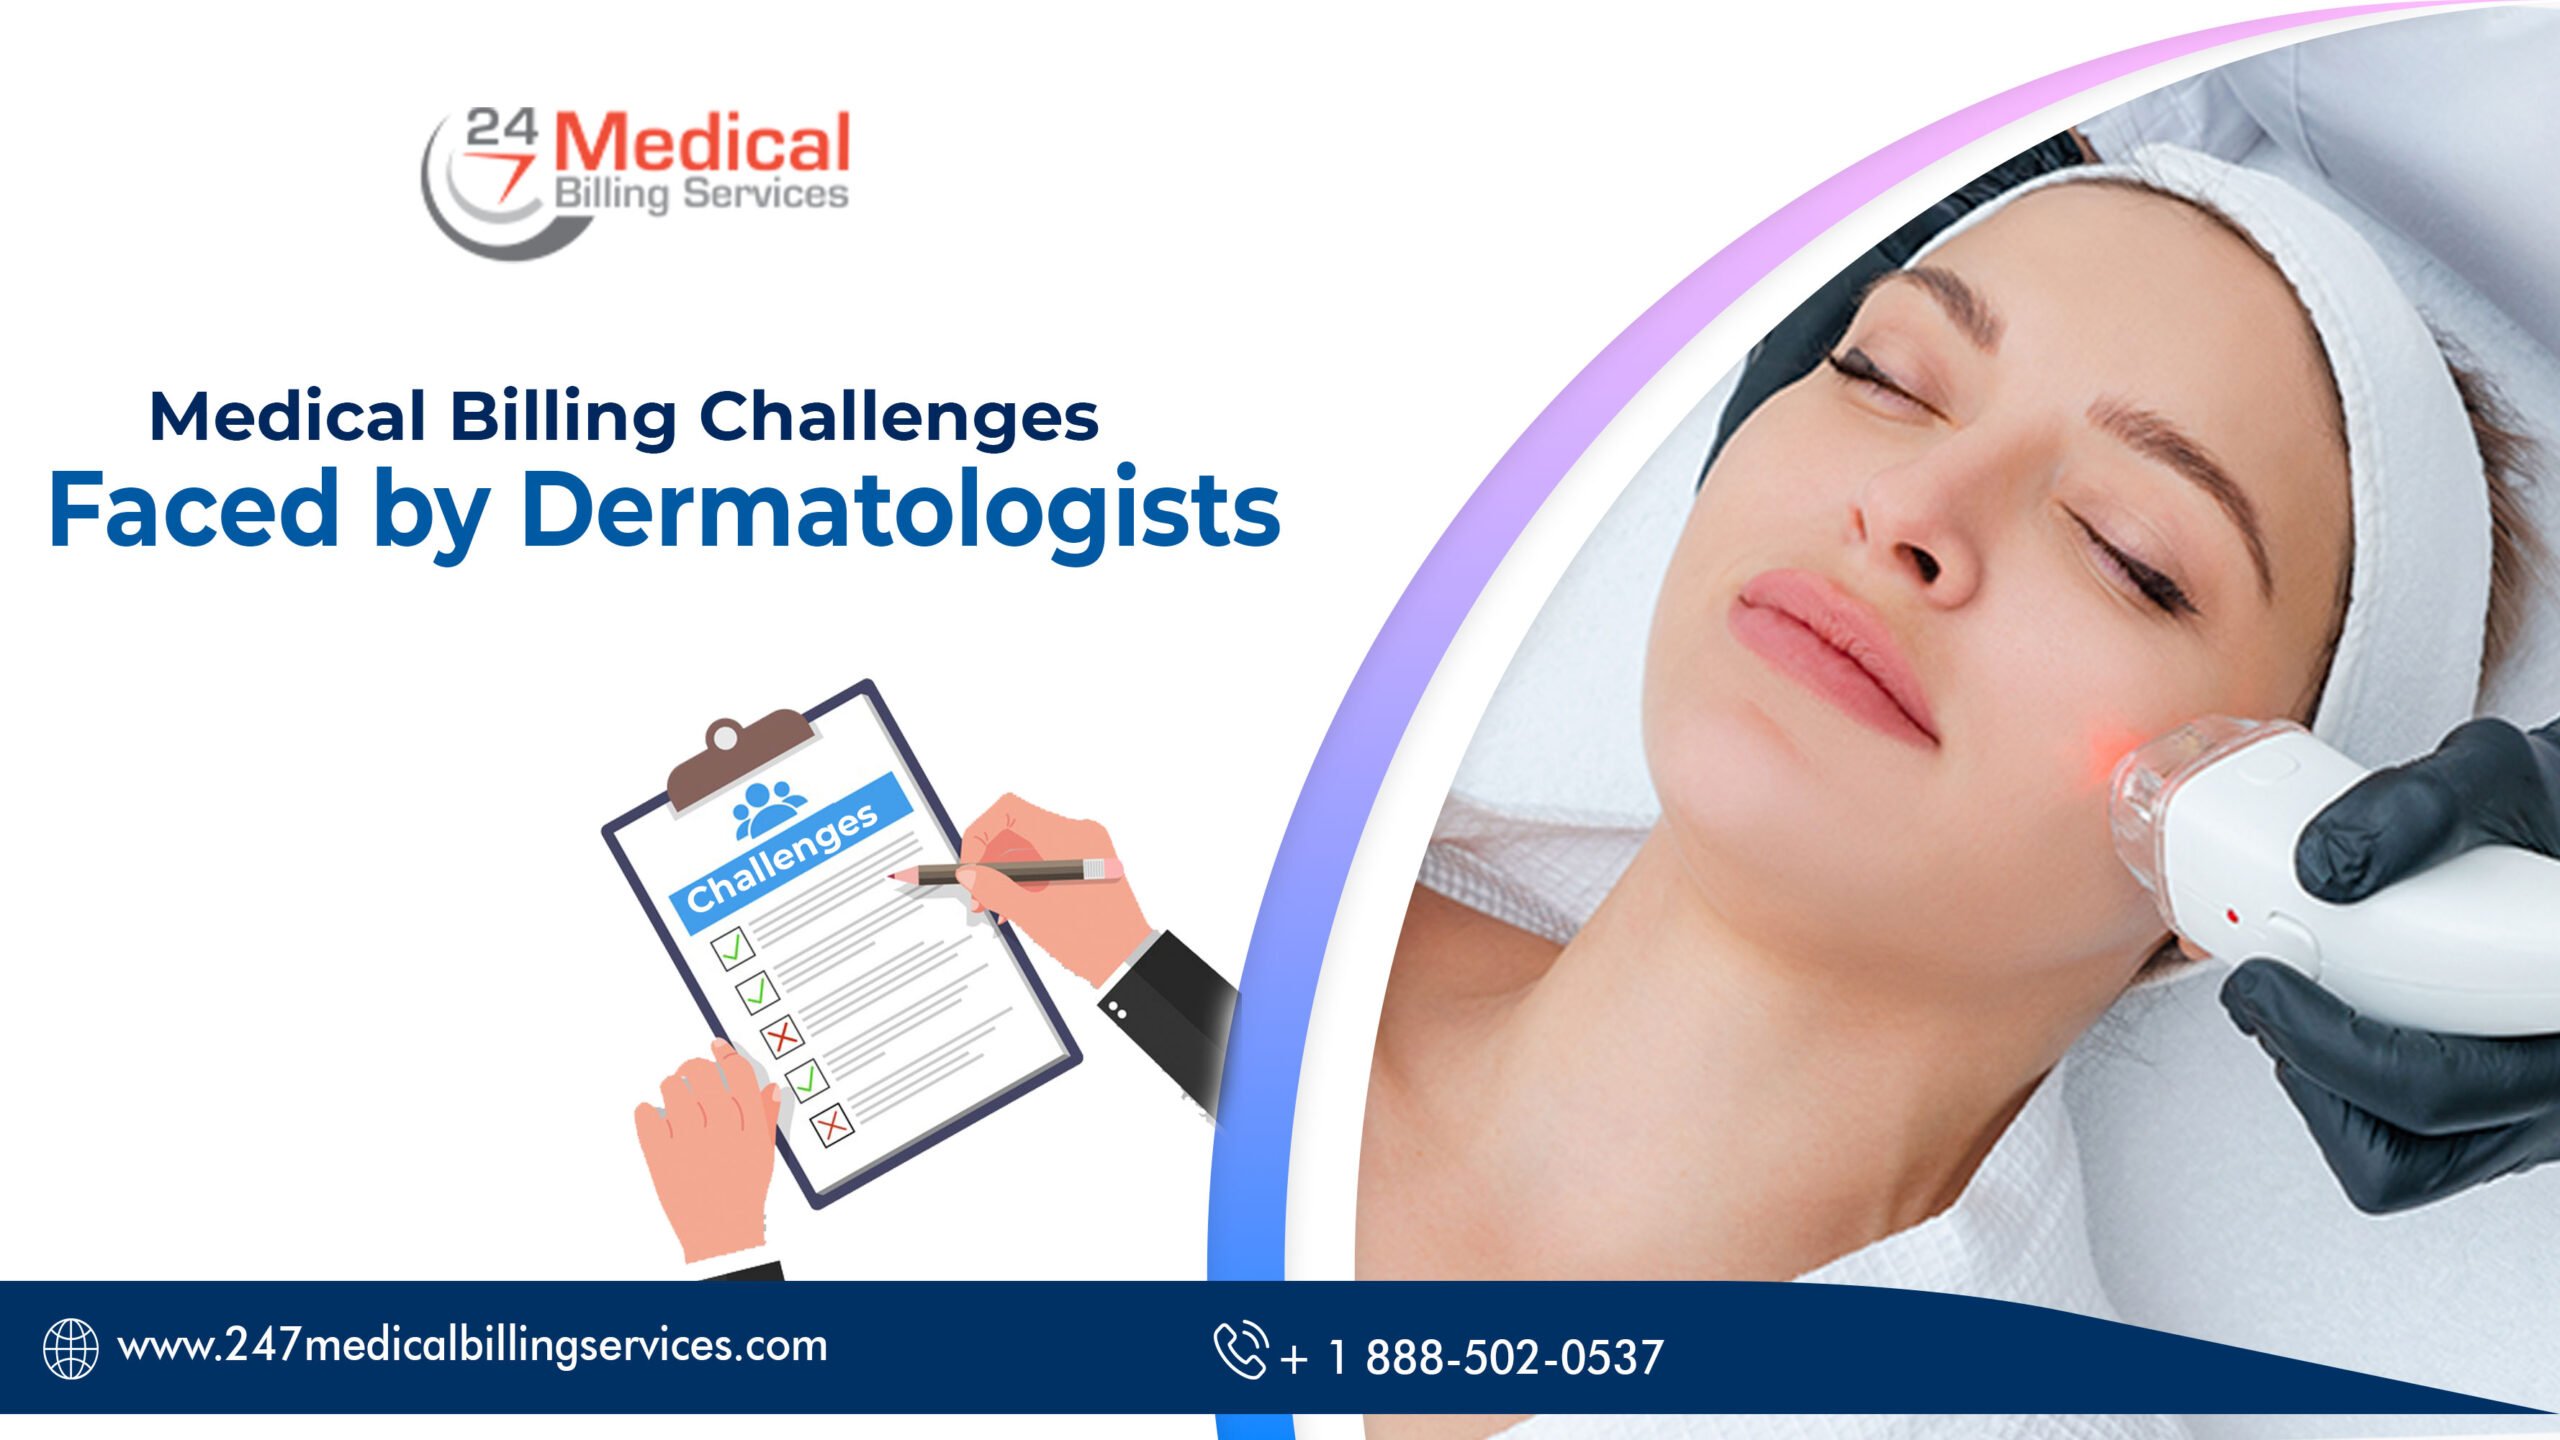  Medical Billing Challenges Faced by Dermatologists